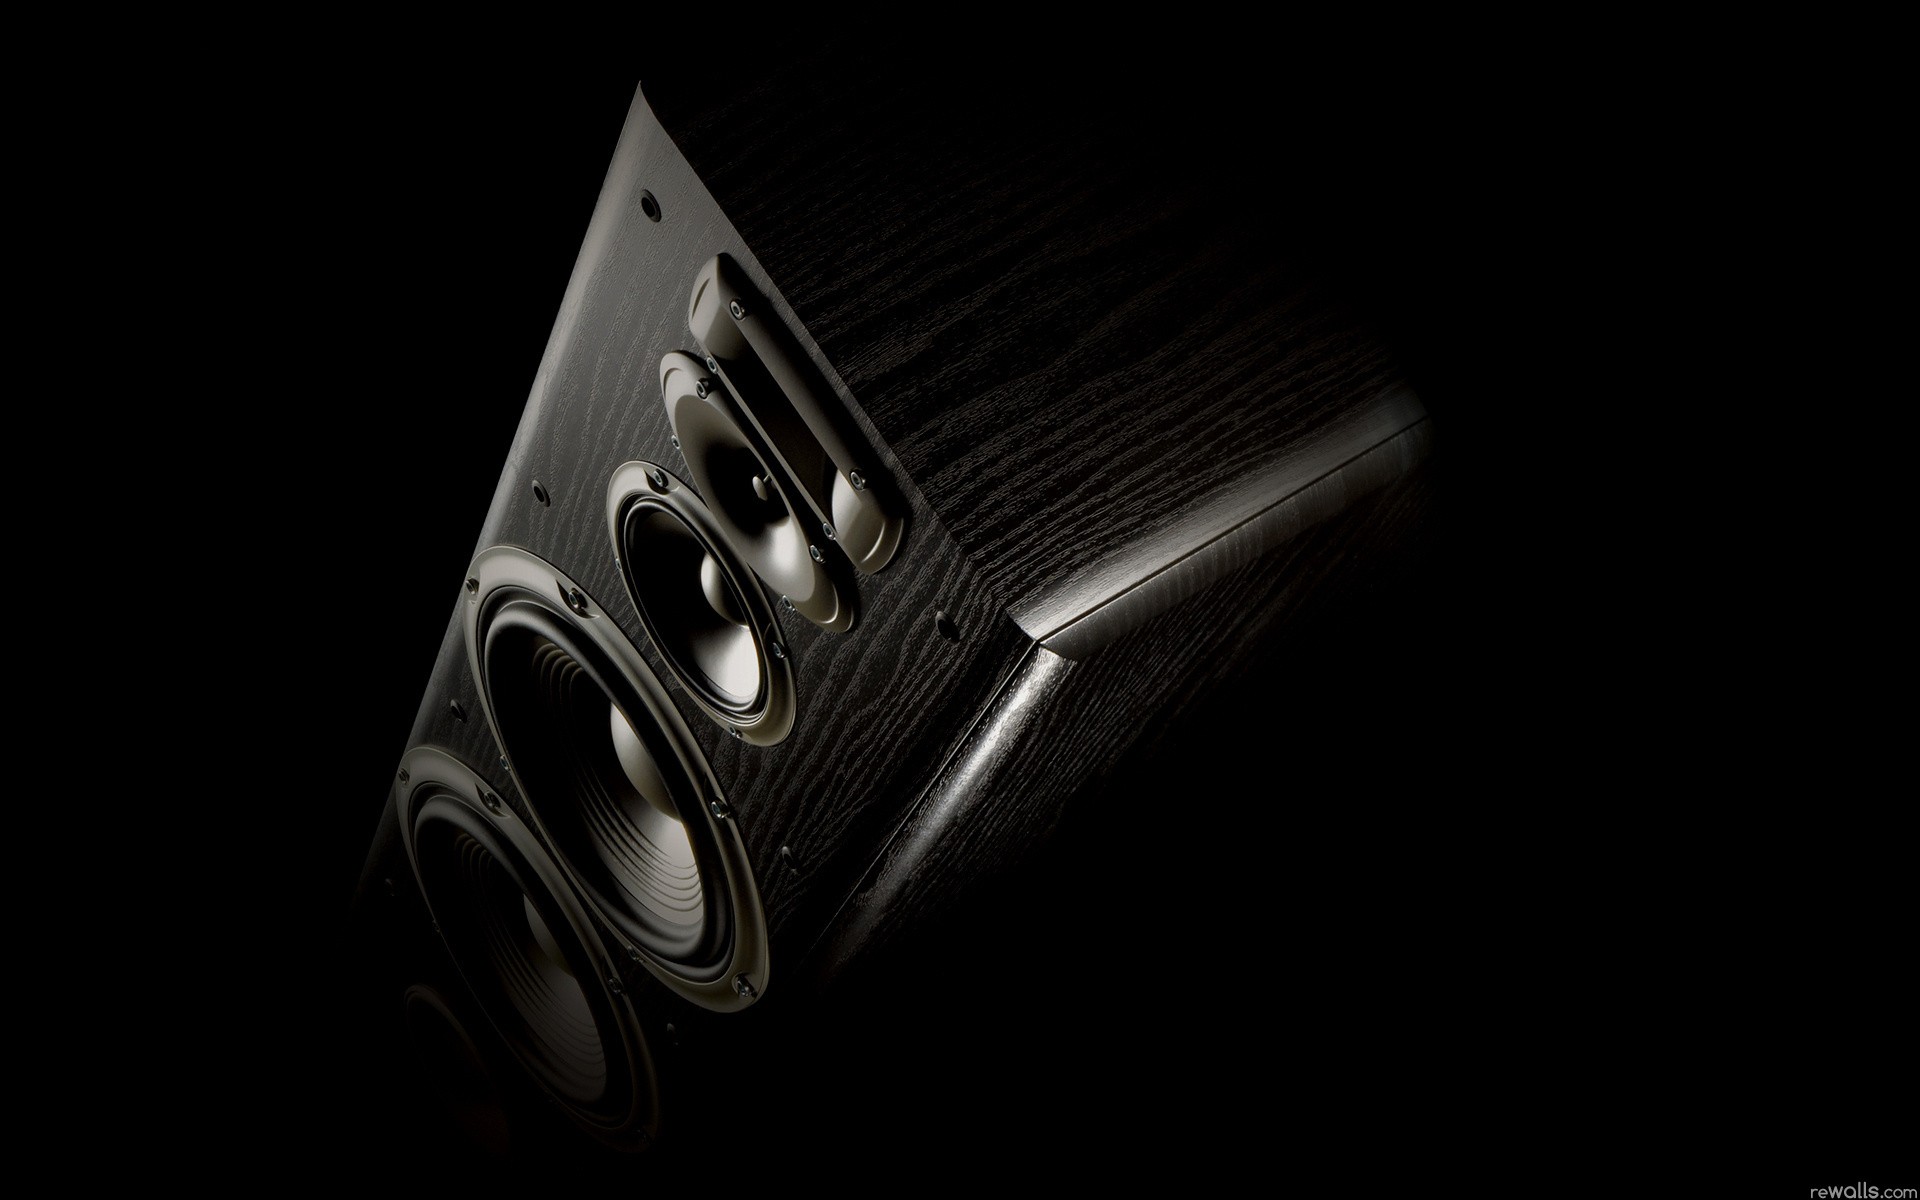 General 1920x1200 music sound technology black background speakers audio-technica low light watermarked